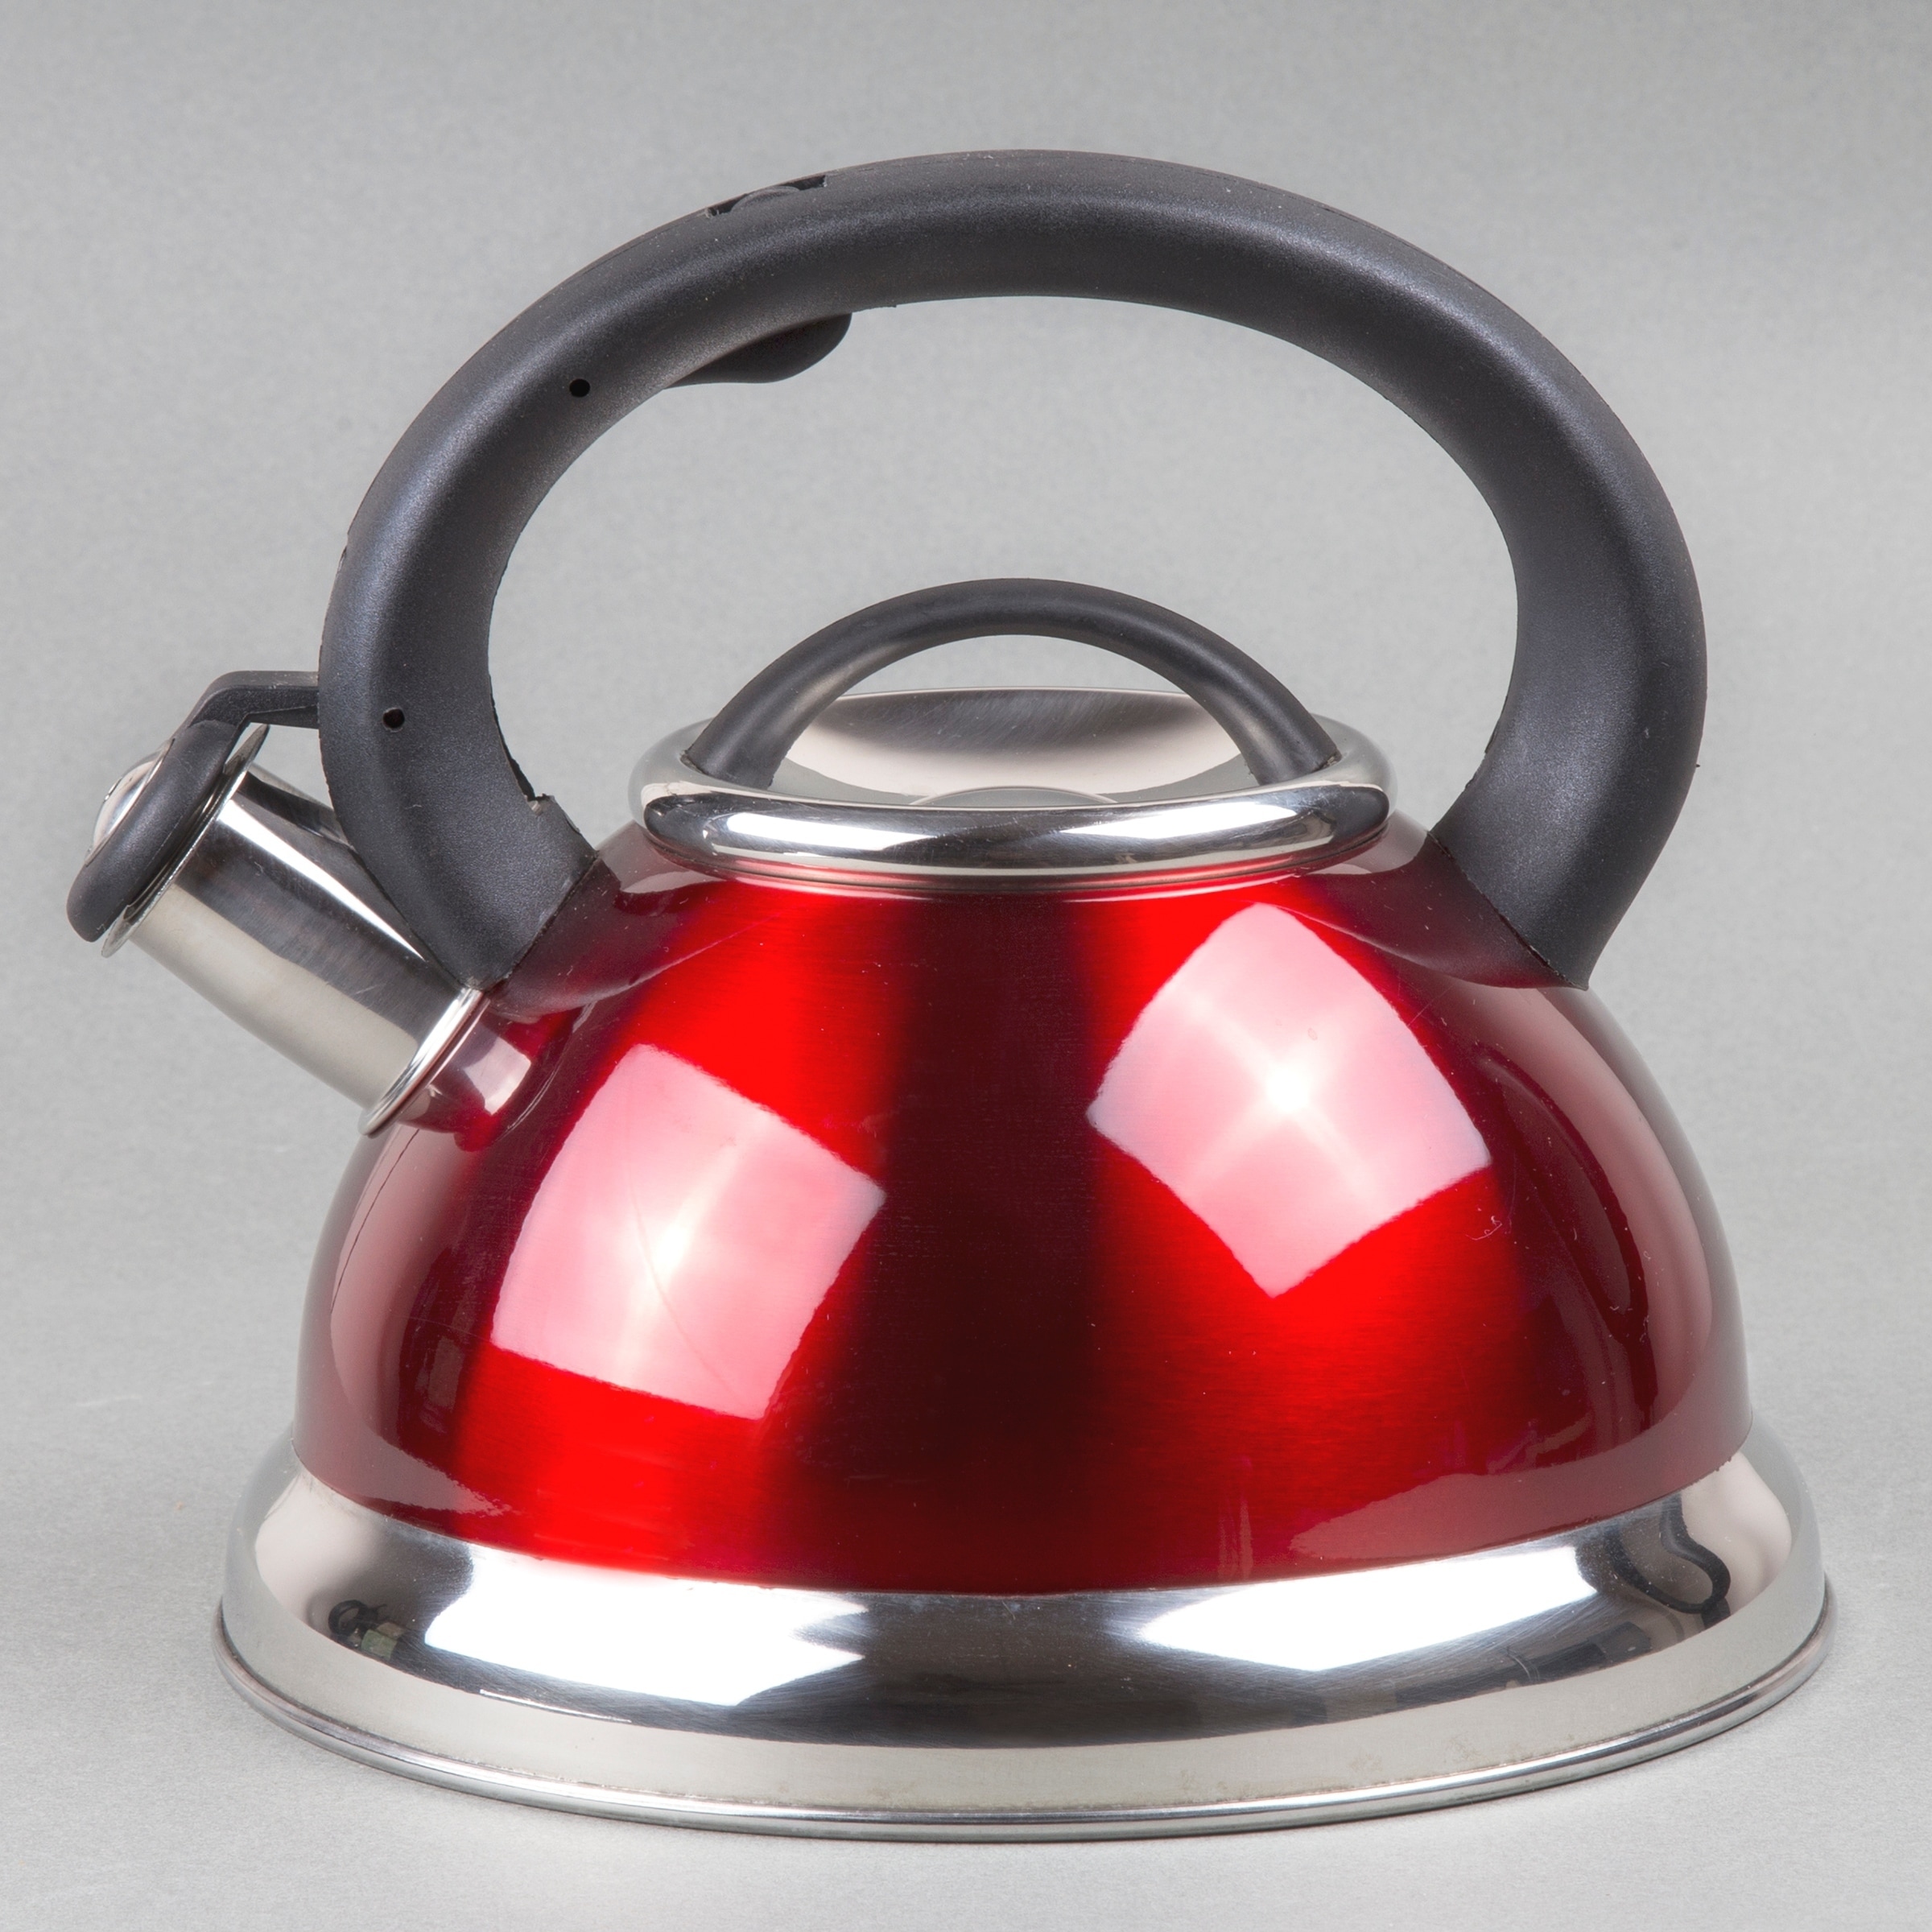 https://ak1.ostkcdn.com/images/products/10669180/Creative-Home-Alexa-3.0-Quart-Stainless-Steel-Whistling-Tea-Kettle-with-Aluminum-Capsulated-Bottom-Metallic-Cranberry-6ecf1432-3202-4e95-8780-b9000619bfe2.jpg